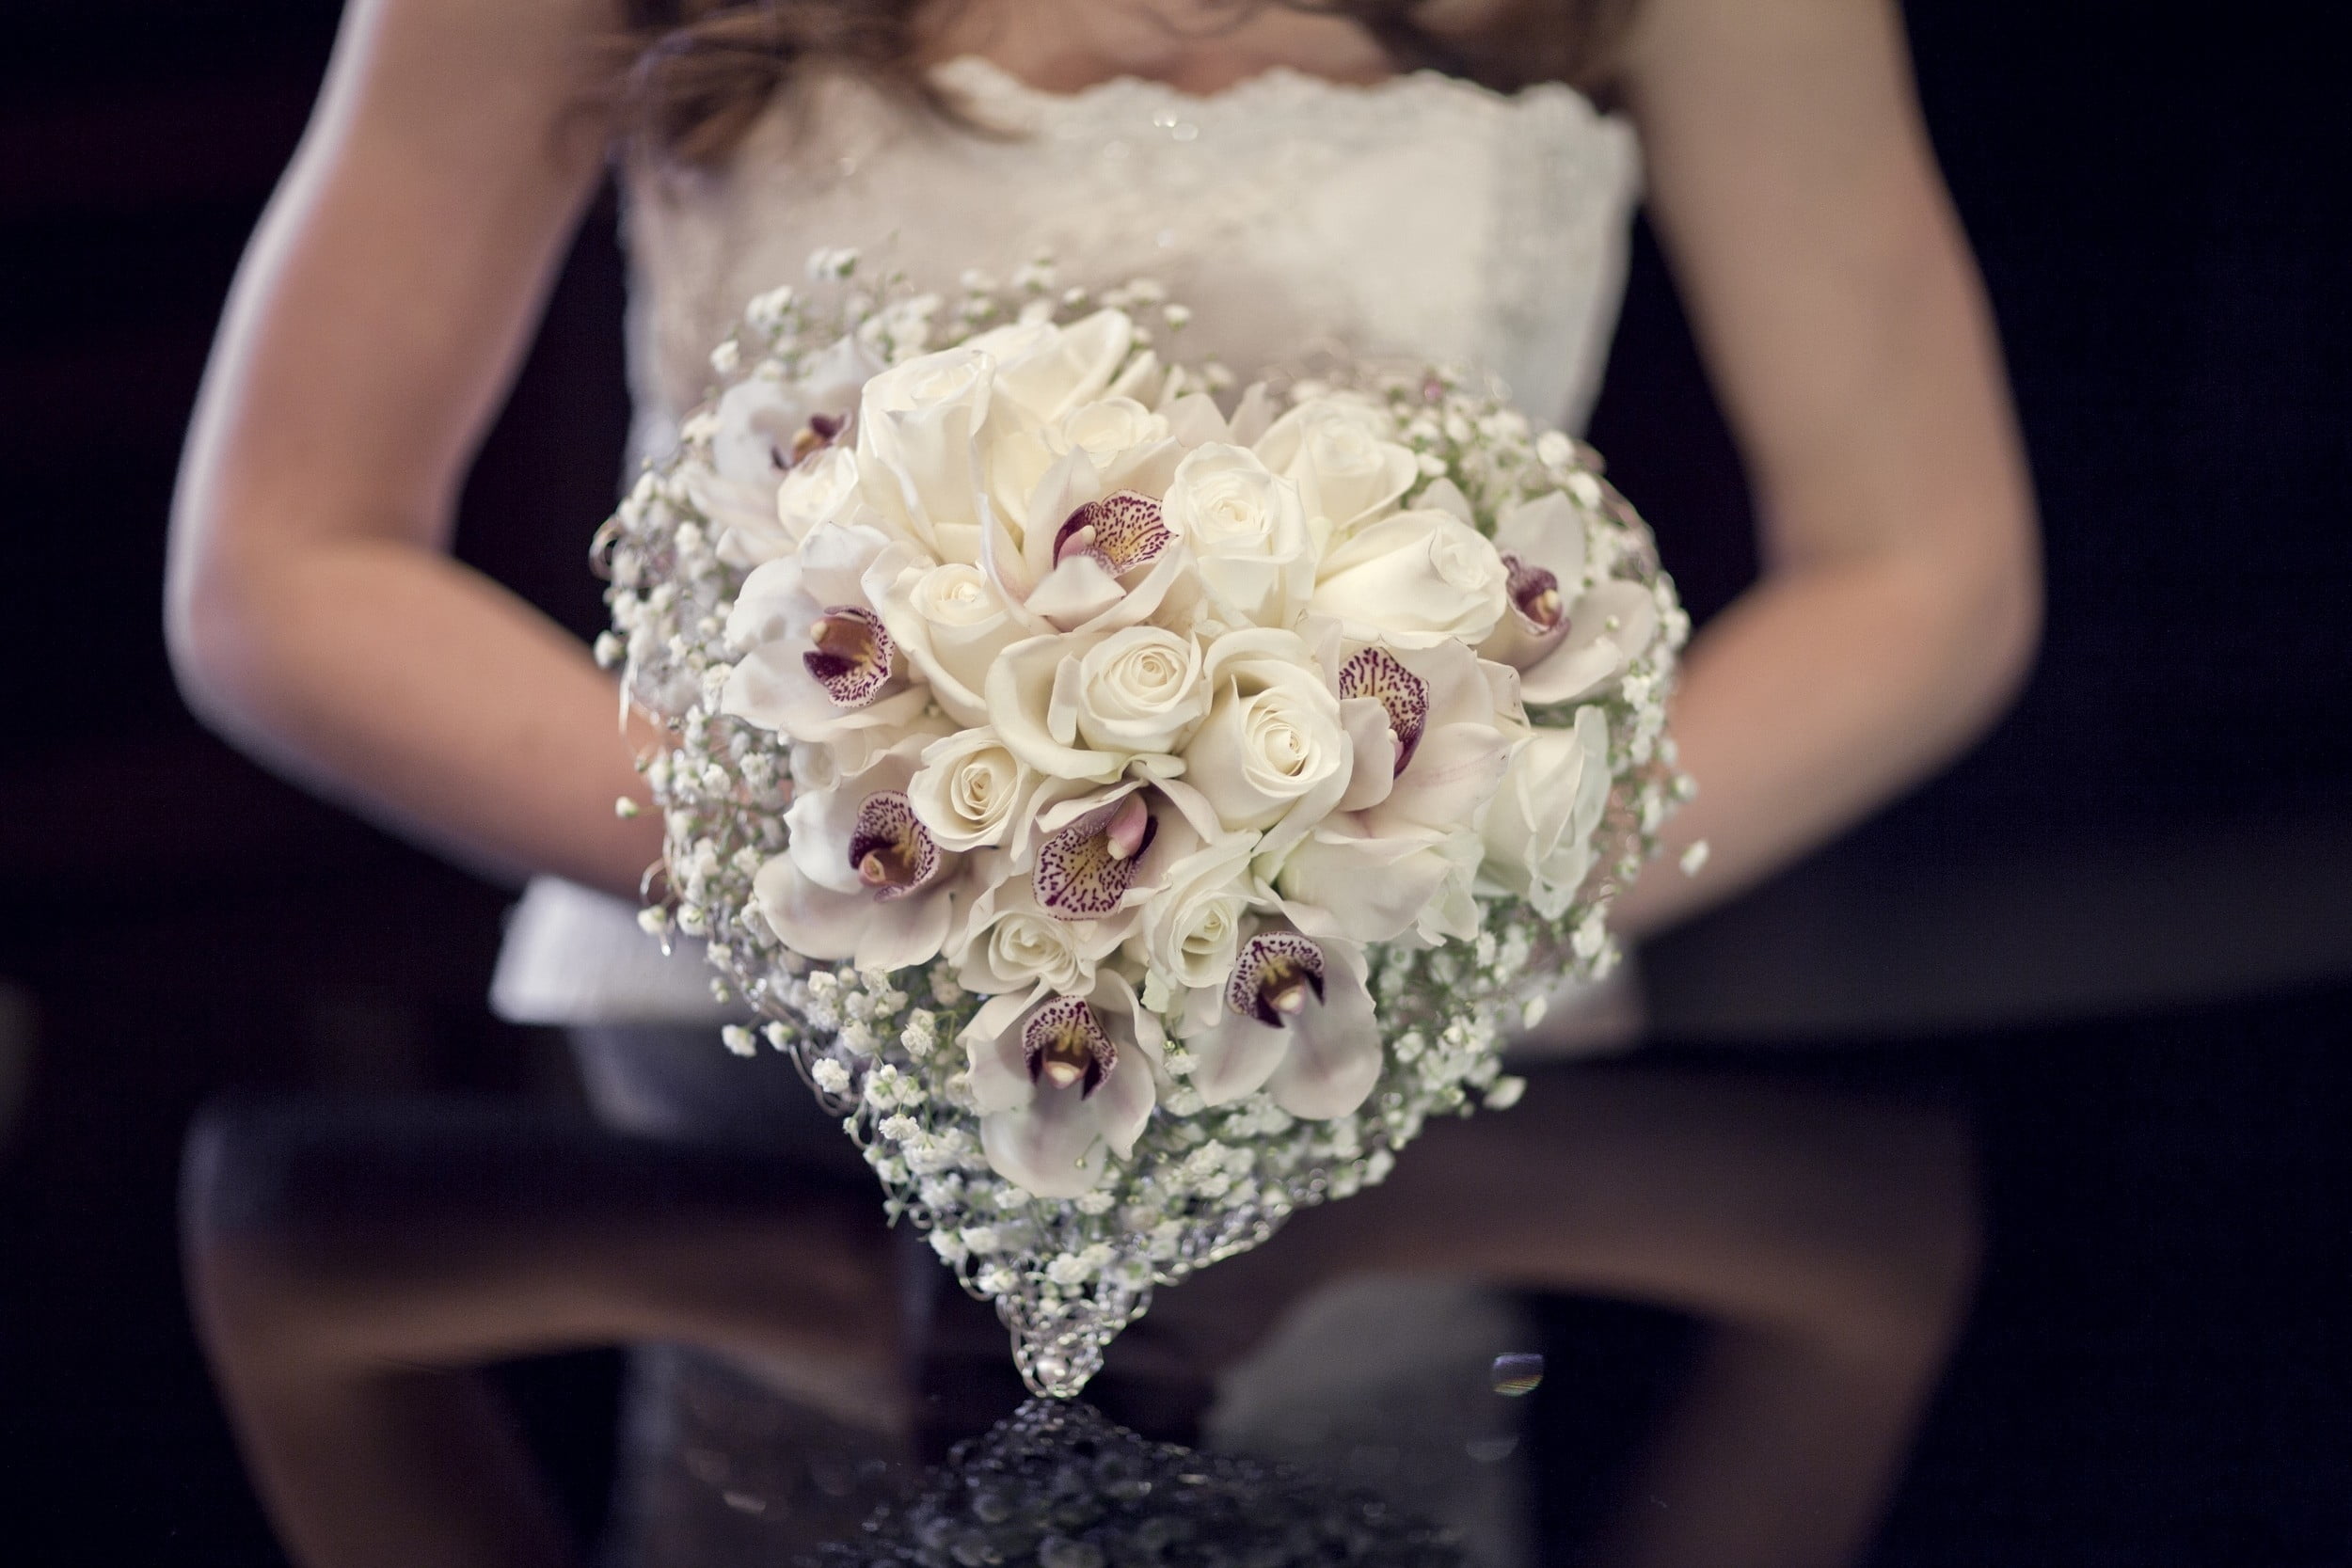 woman holding heart-shaped white and purple petaled flower arrangement